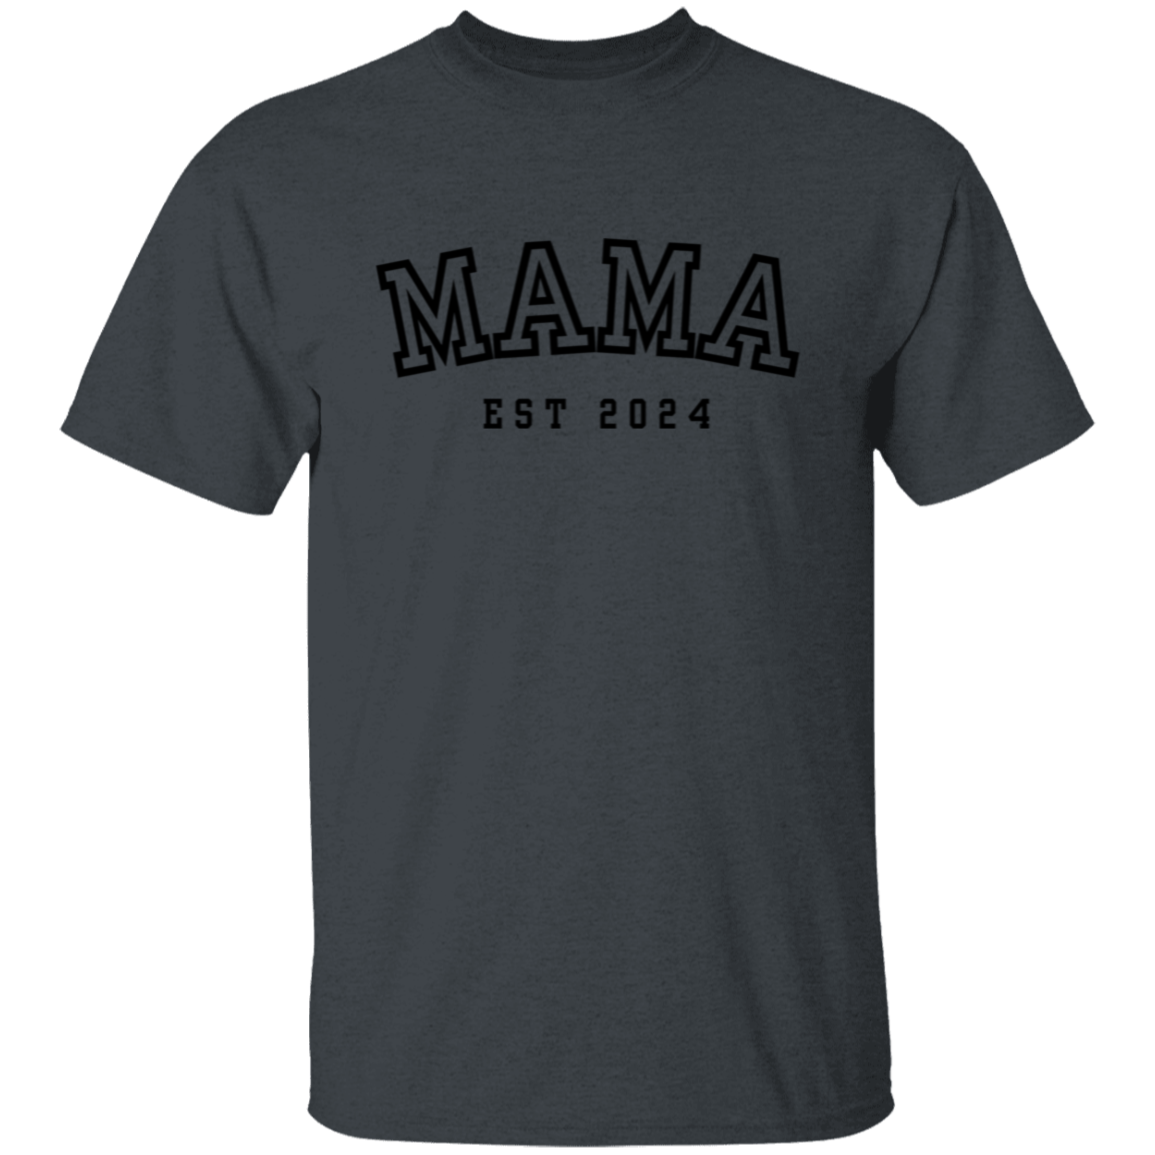 Mama Est 2024 T-Shirt | Mother's Day Gift, New Mom Gift, Pregnancy Announcement